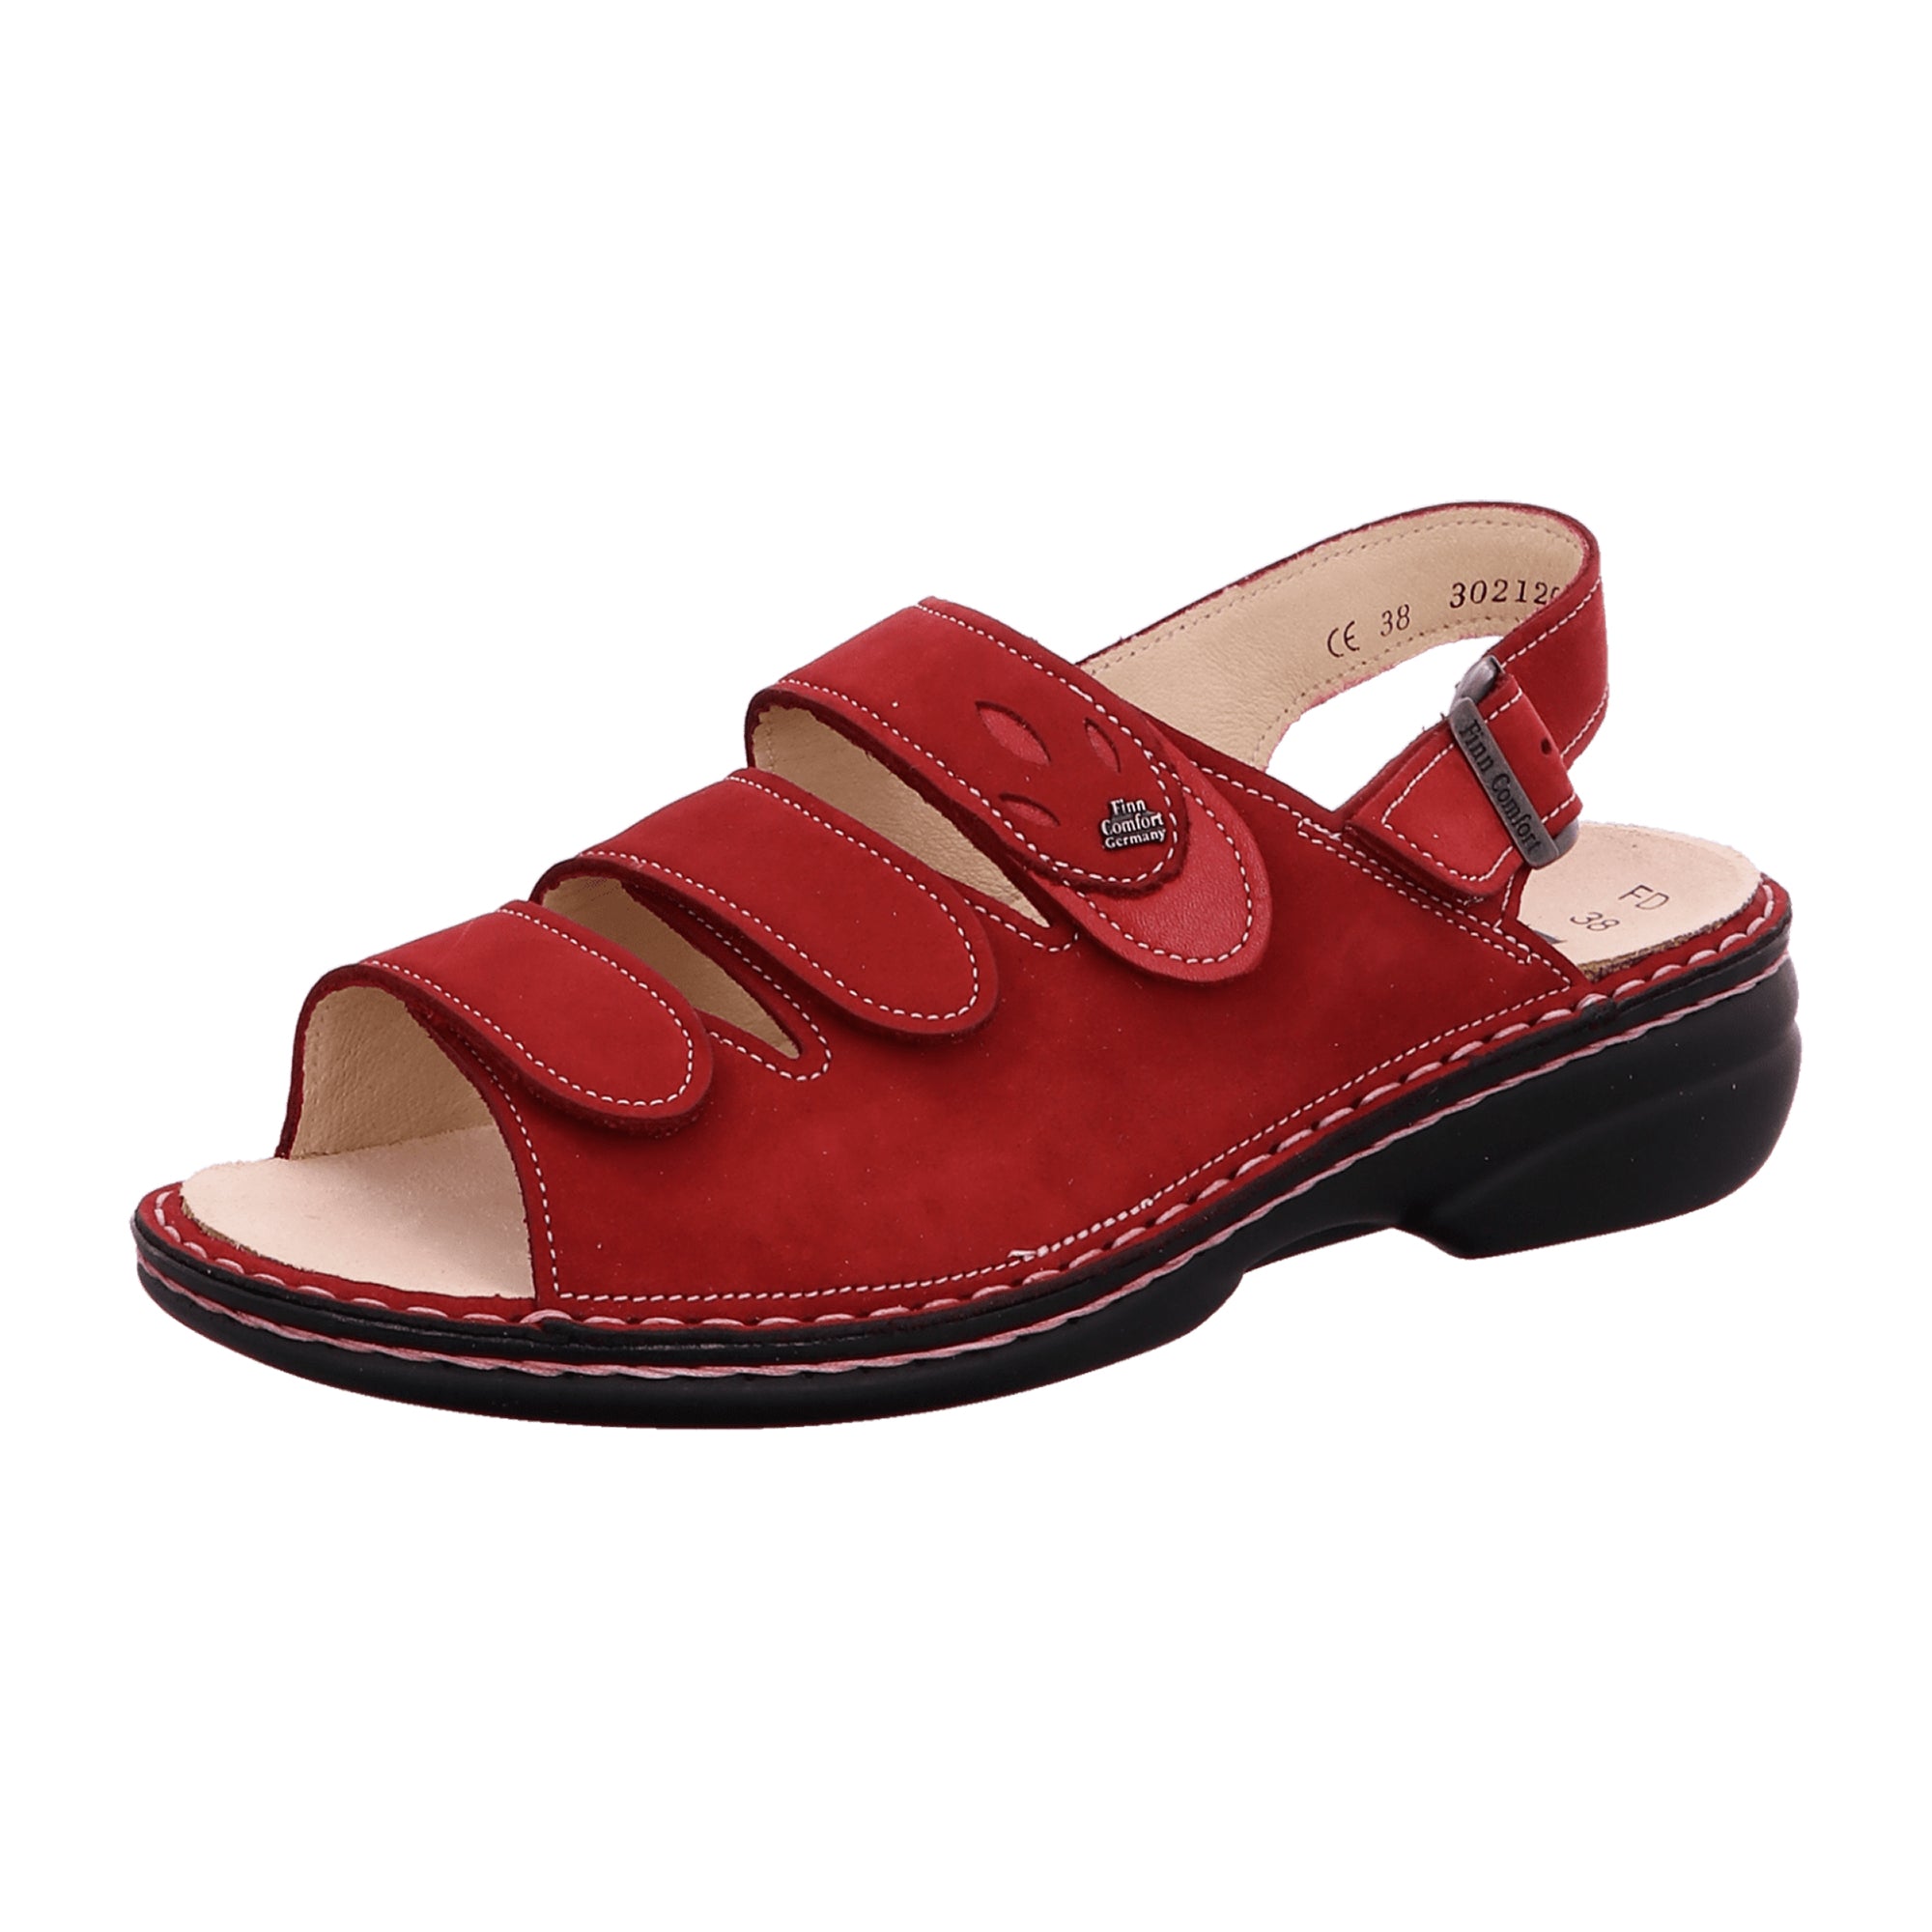 Finn Comfort Saloniki Women's Sandals - Nubuck Leather Comfort Sandals with Removable Insoles in Chili/Pomodore Red